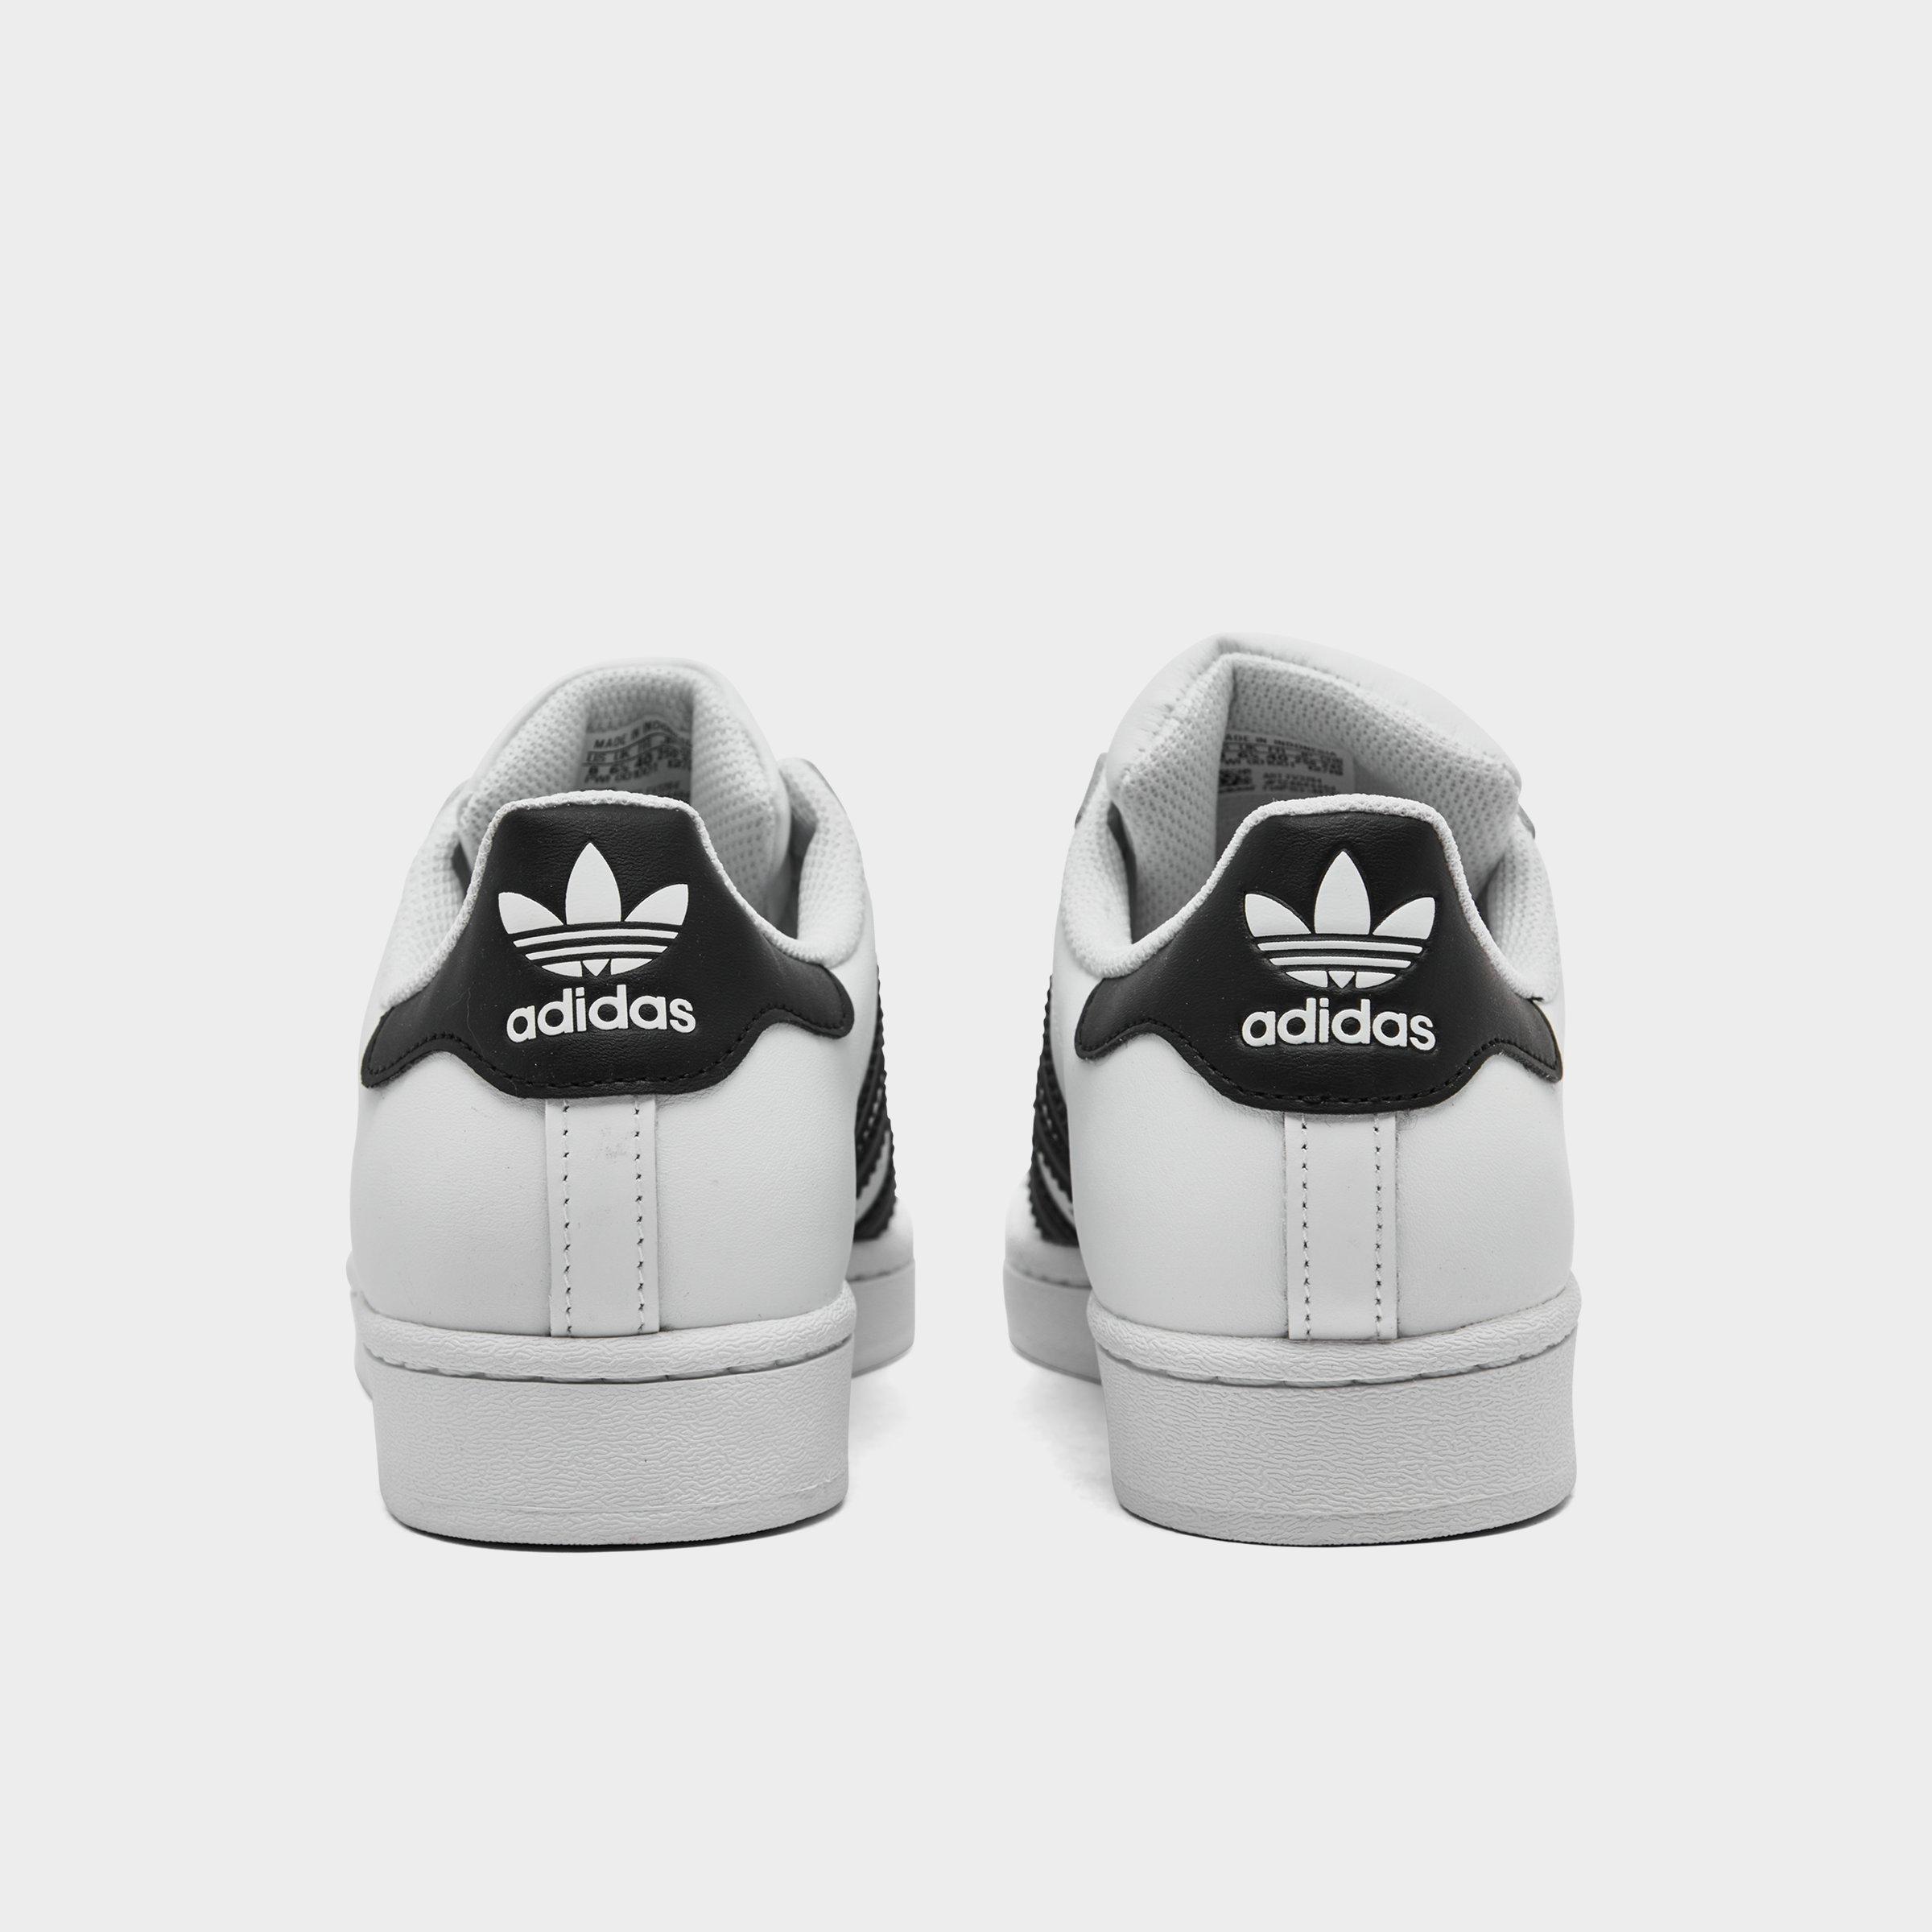 adidas shoes with front view